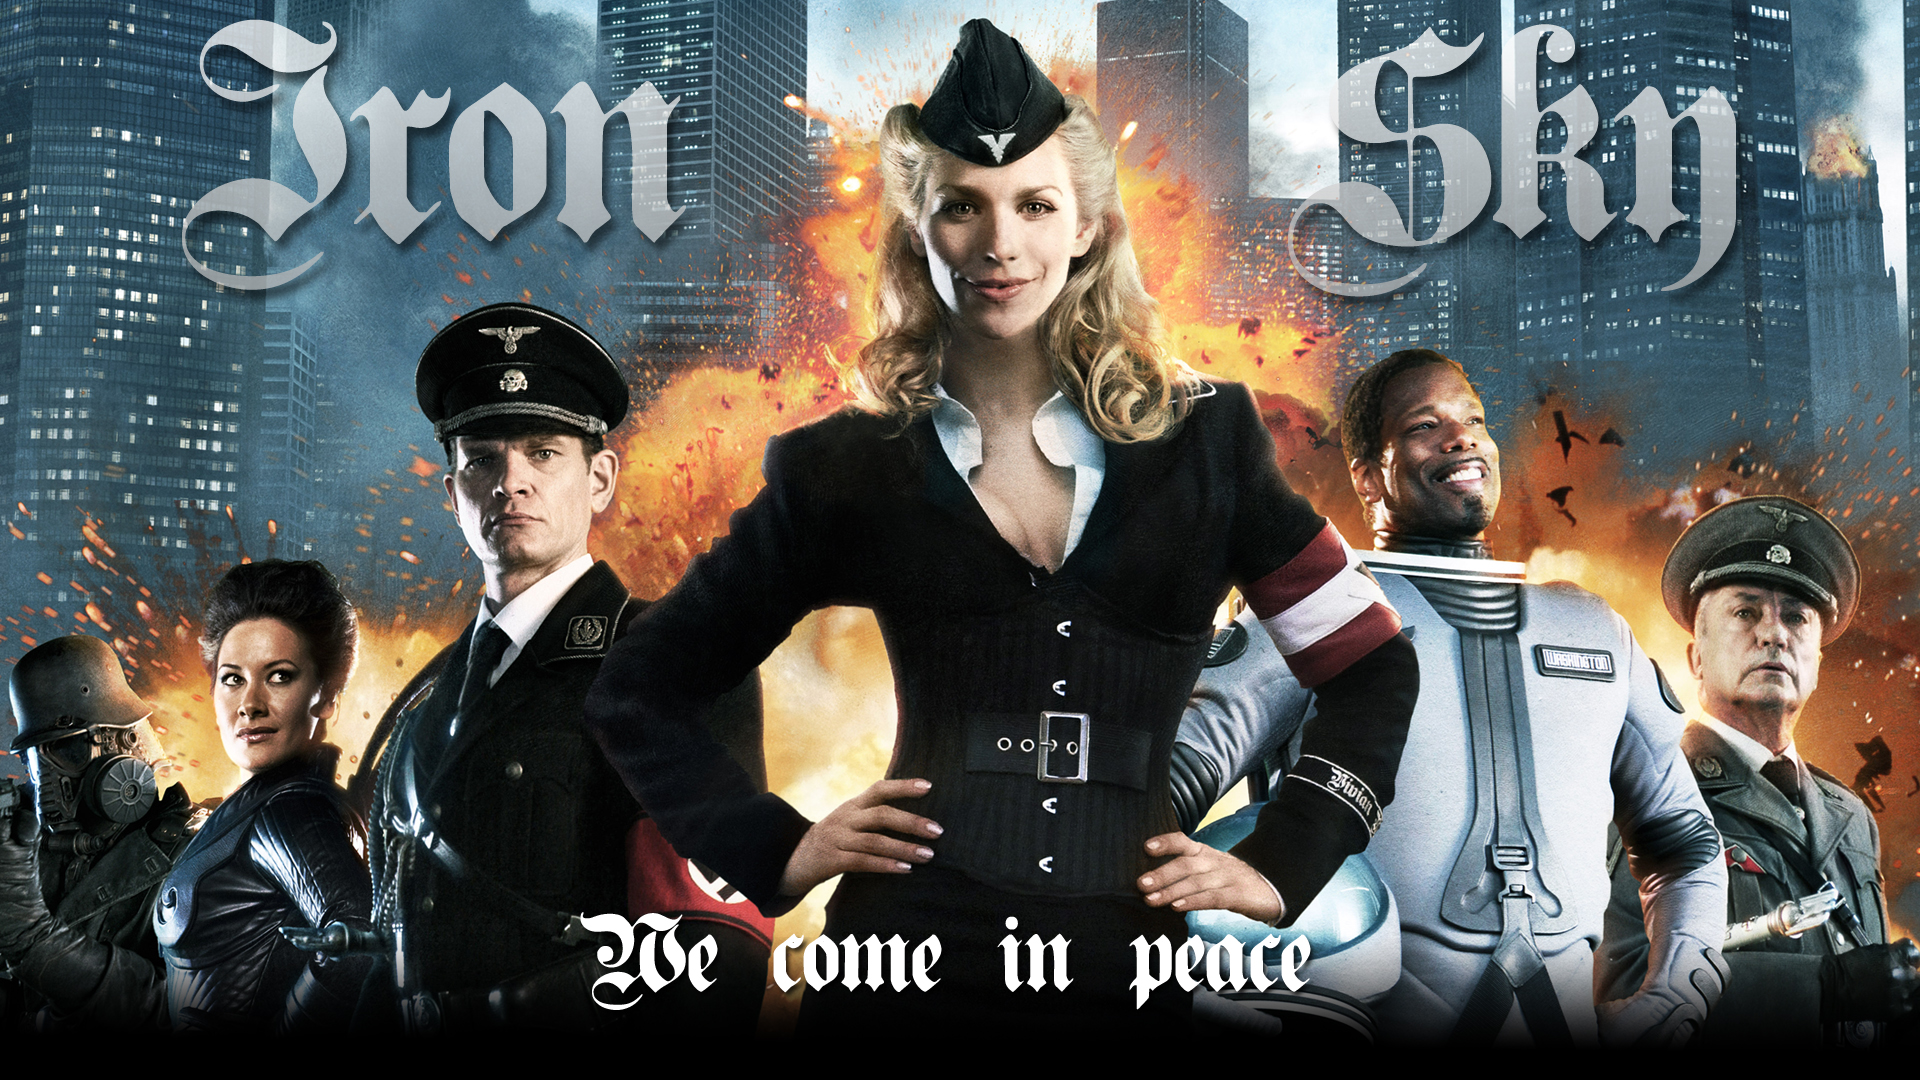 Nice Images Collection: Iron Sky Desktop Wallpapers